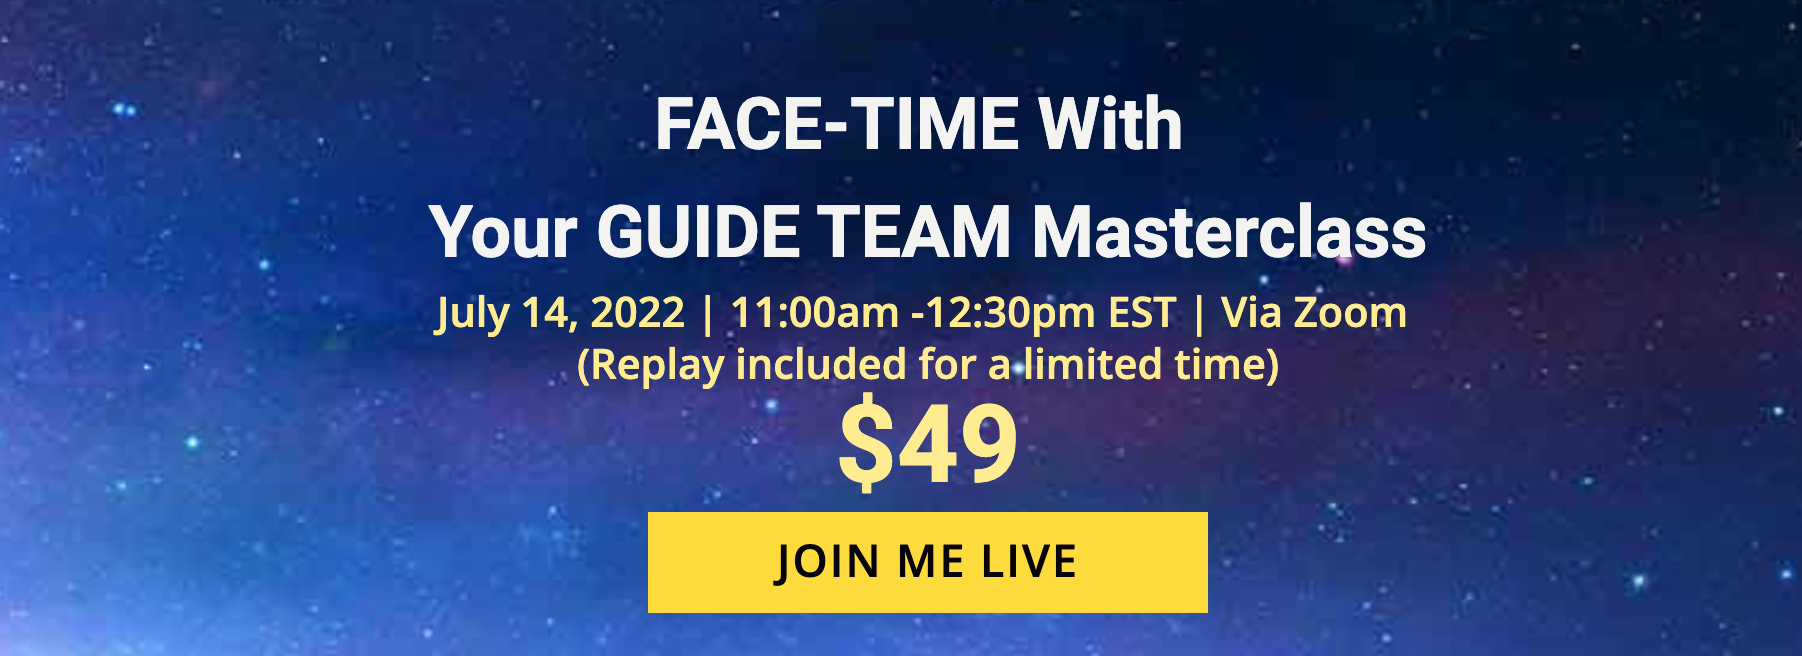 FACE-TIME With Your GUIDE TEAM Masterclass 4